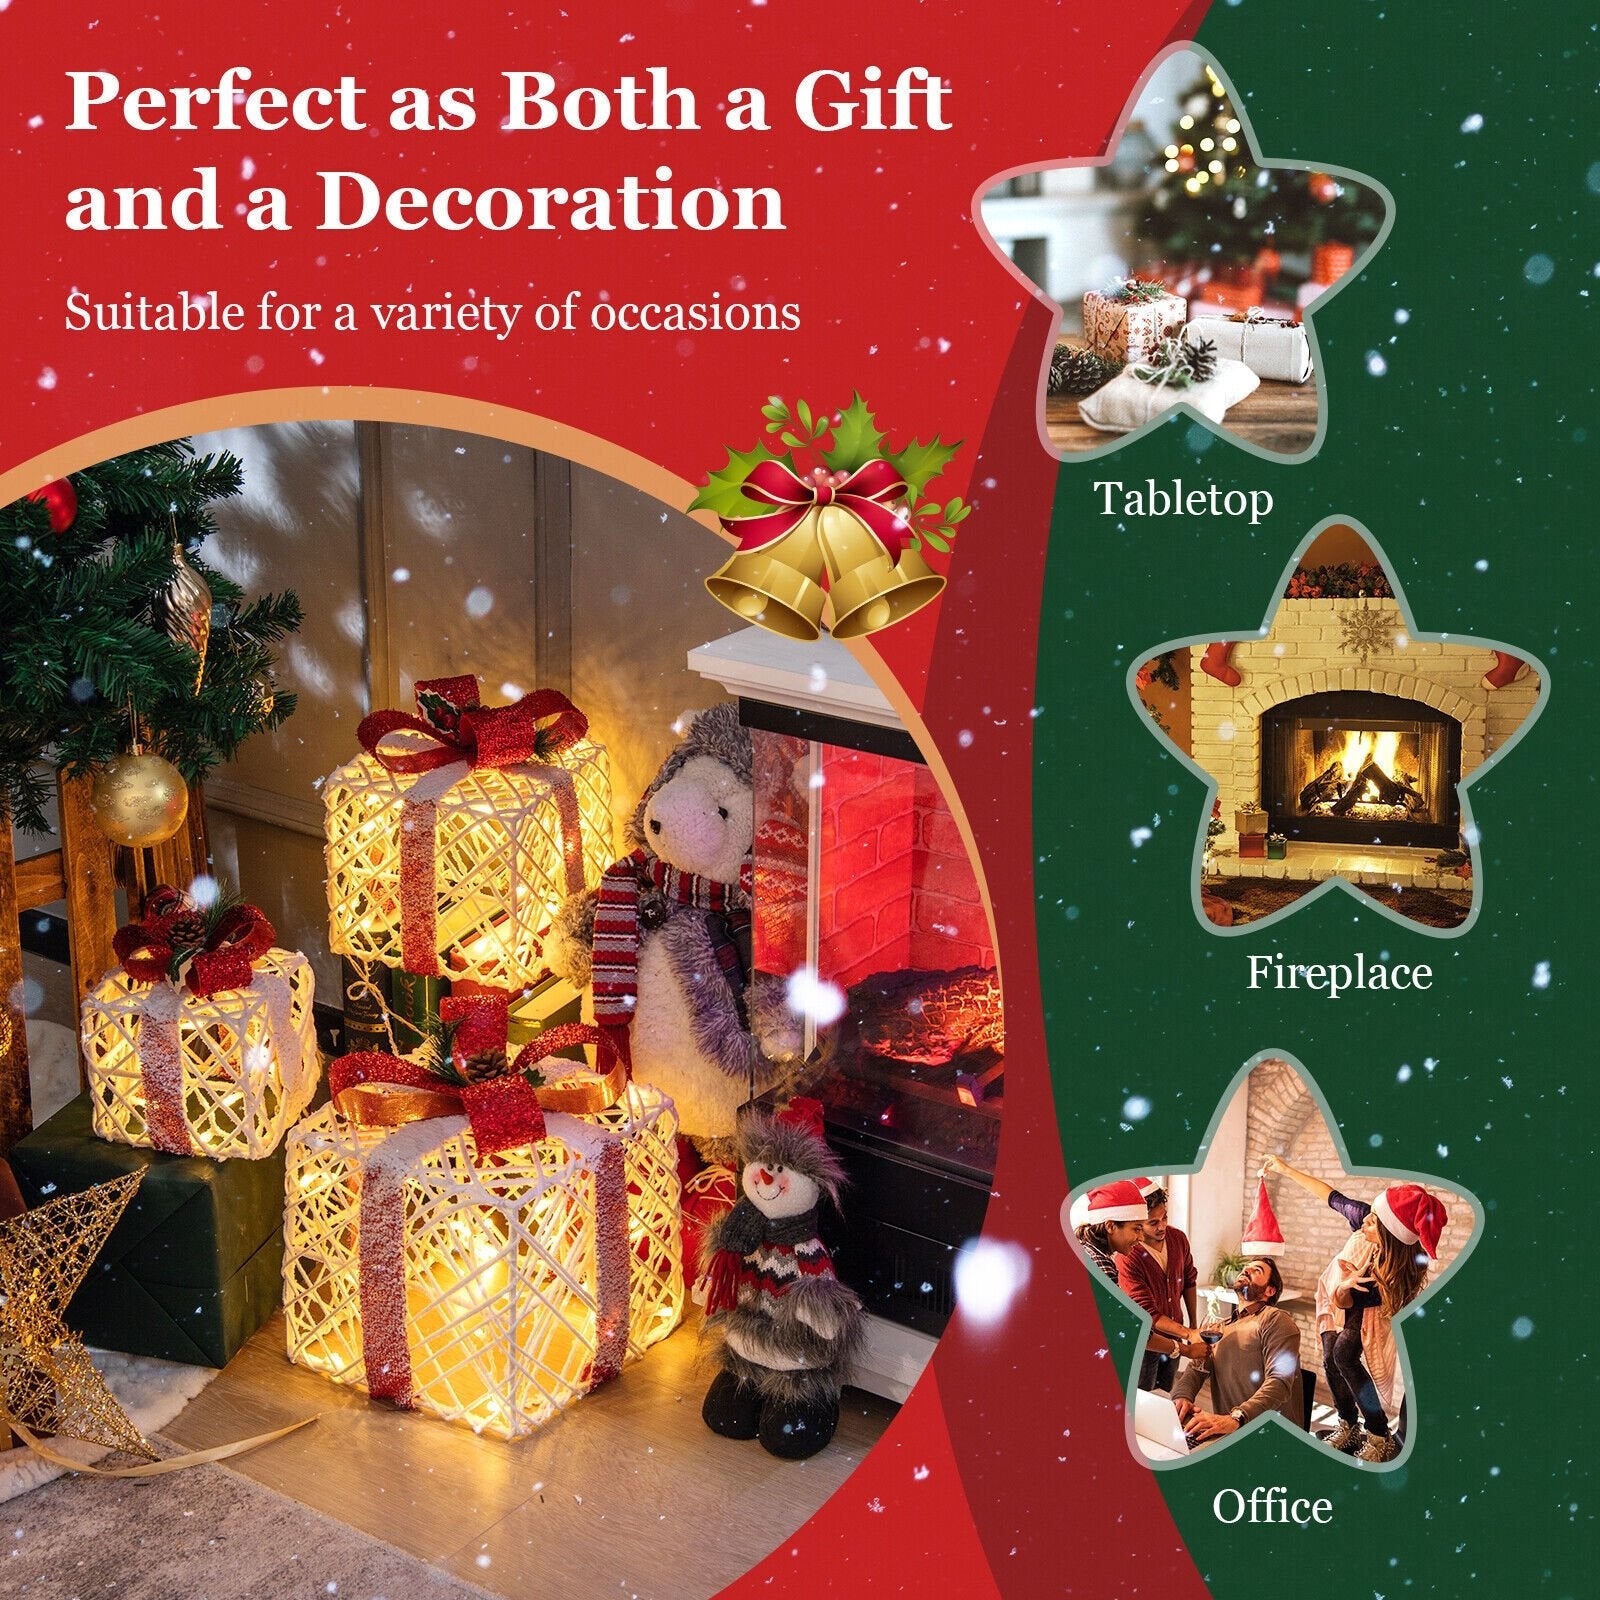 Set of 3 Christmas Lighted Gift Boxes Decorations with Red Bowknots, Red & White - Gallery Canada